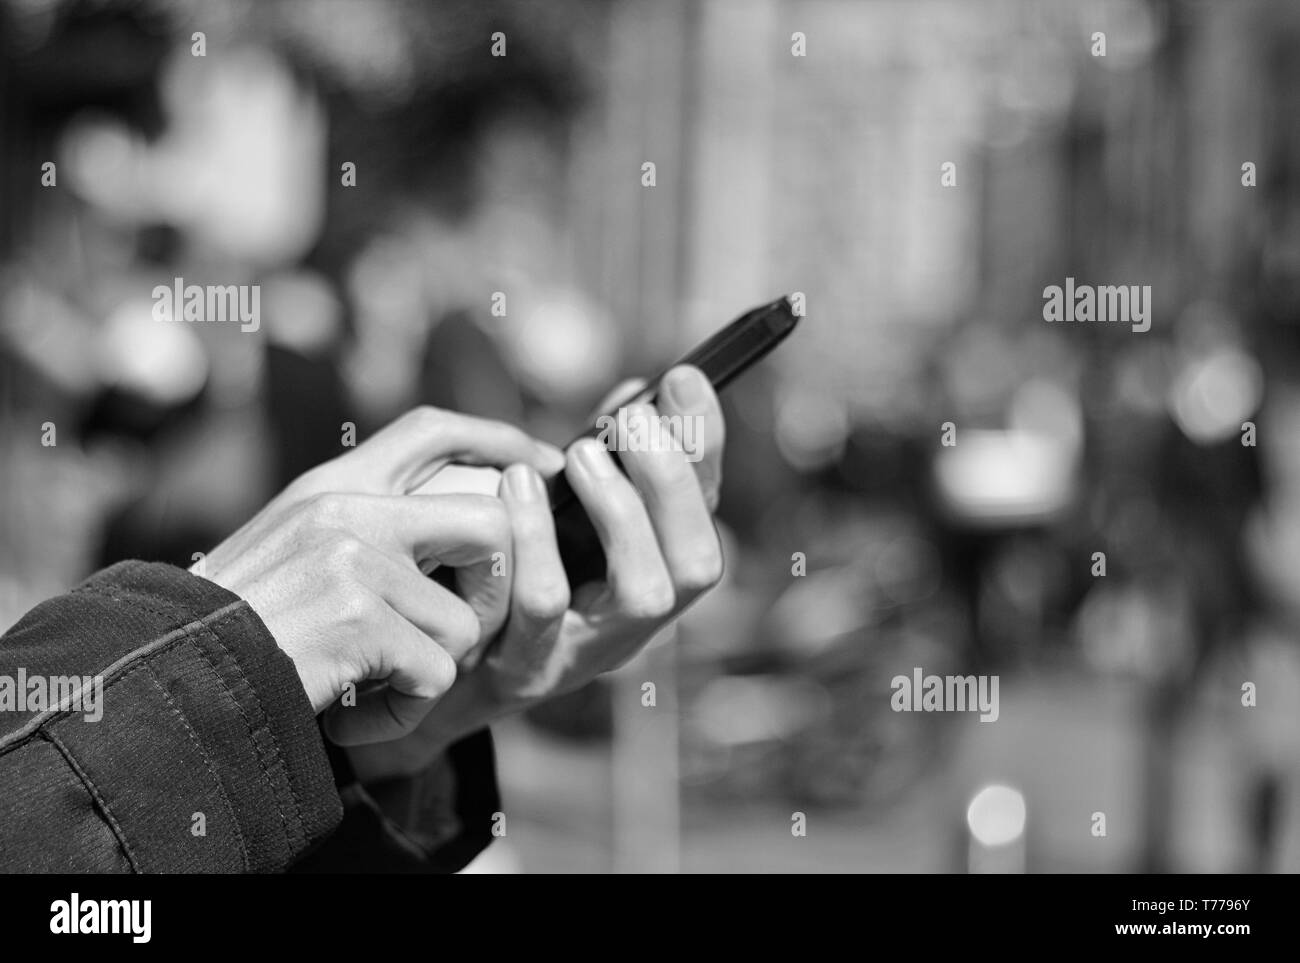 Man holding and typing on mobile phone on the street, crowd of people in background. Technology addiction. Black and white image. Stock Photo